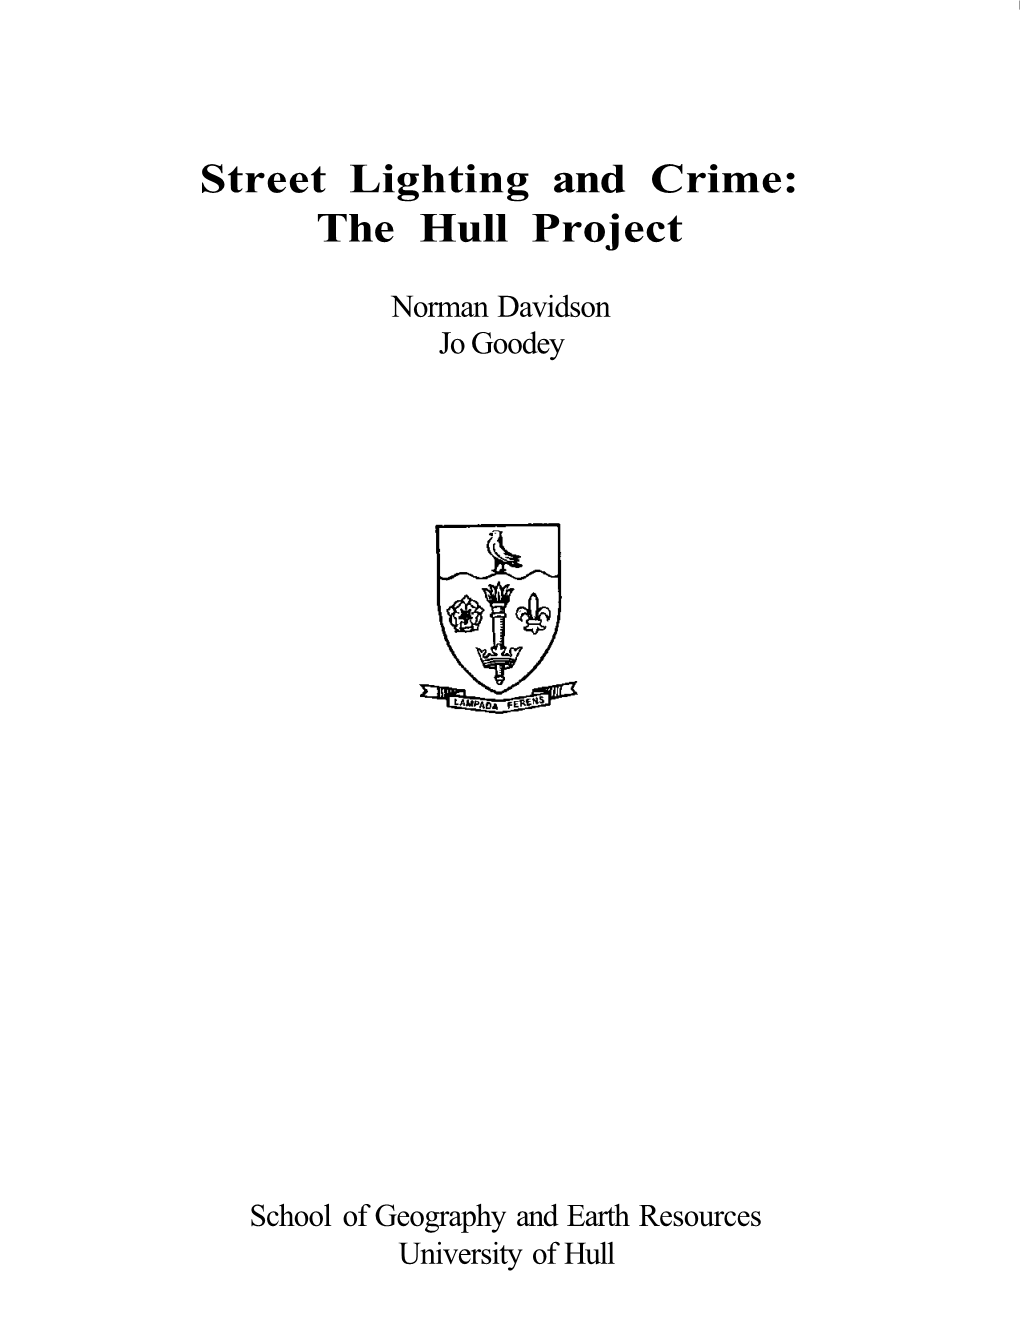 Street Lighting and Crime: the Hull Project